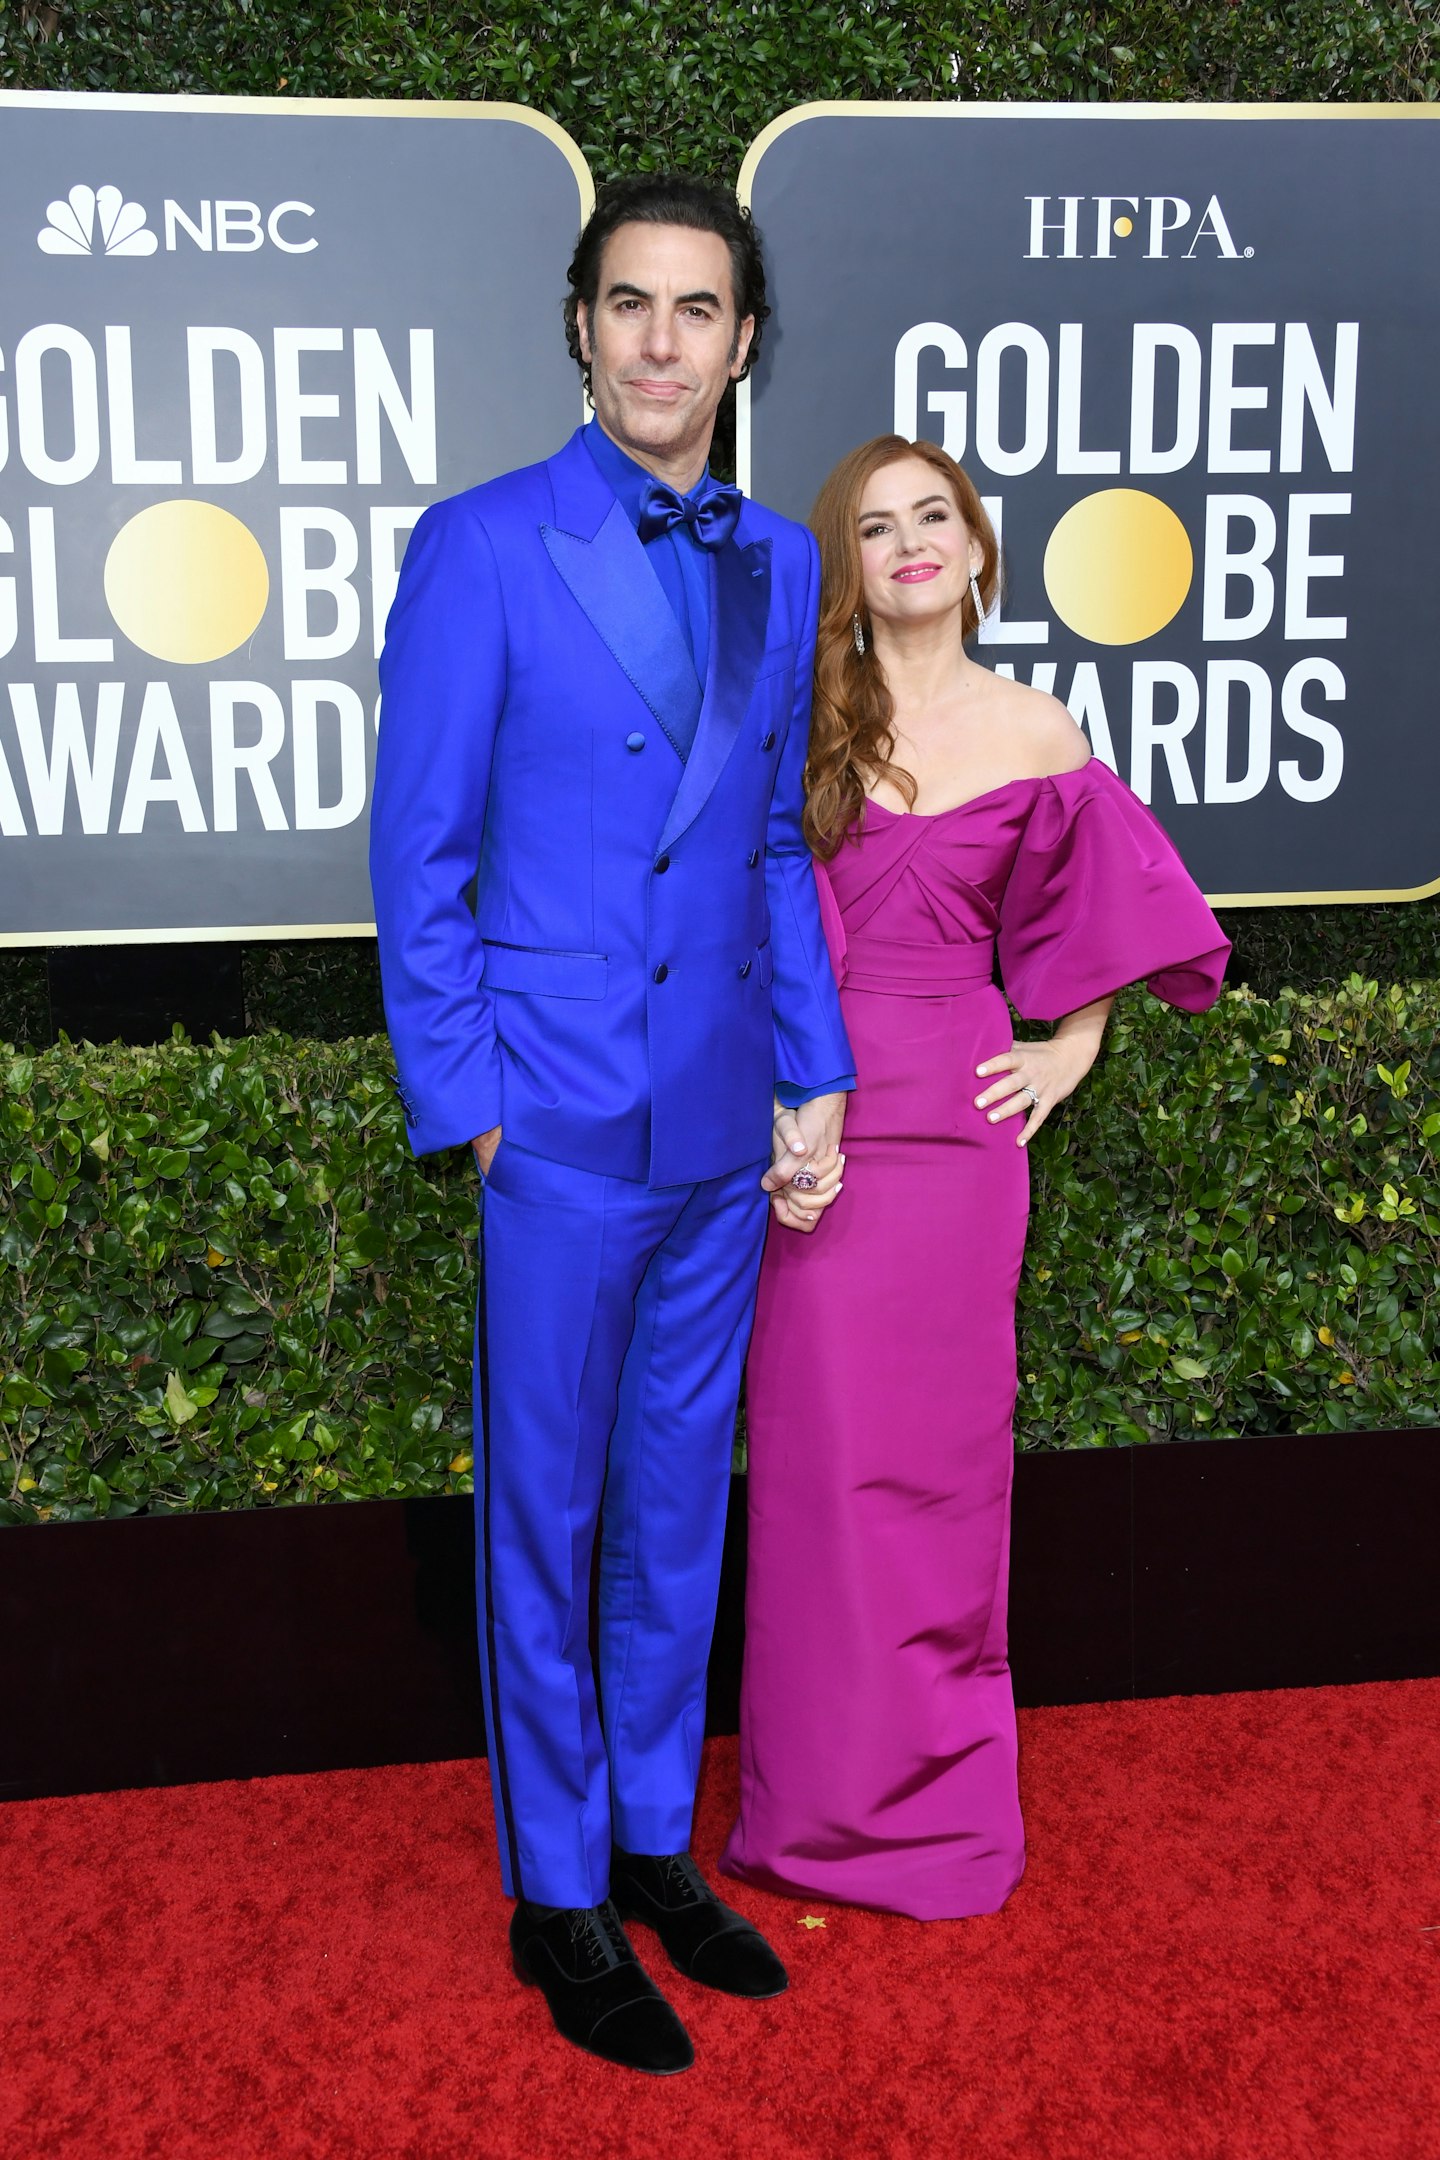 Sacha Baron Cohen in an electric blue suit with Isla Fisher in Monique Lhuillier